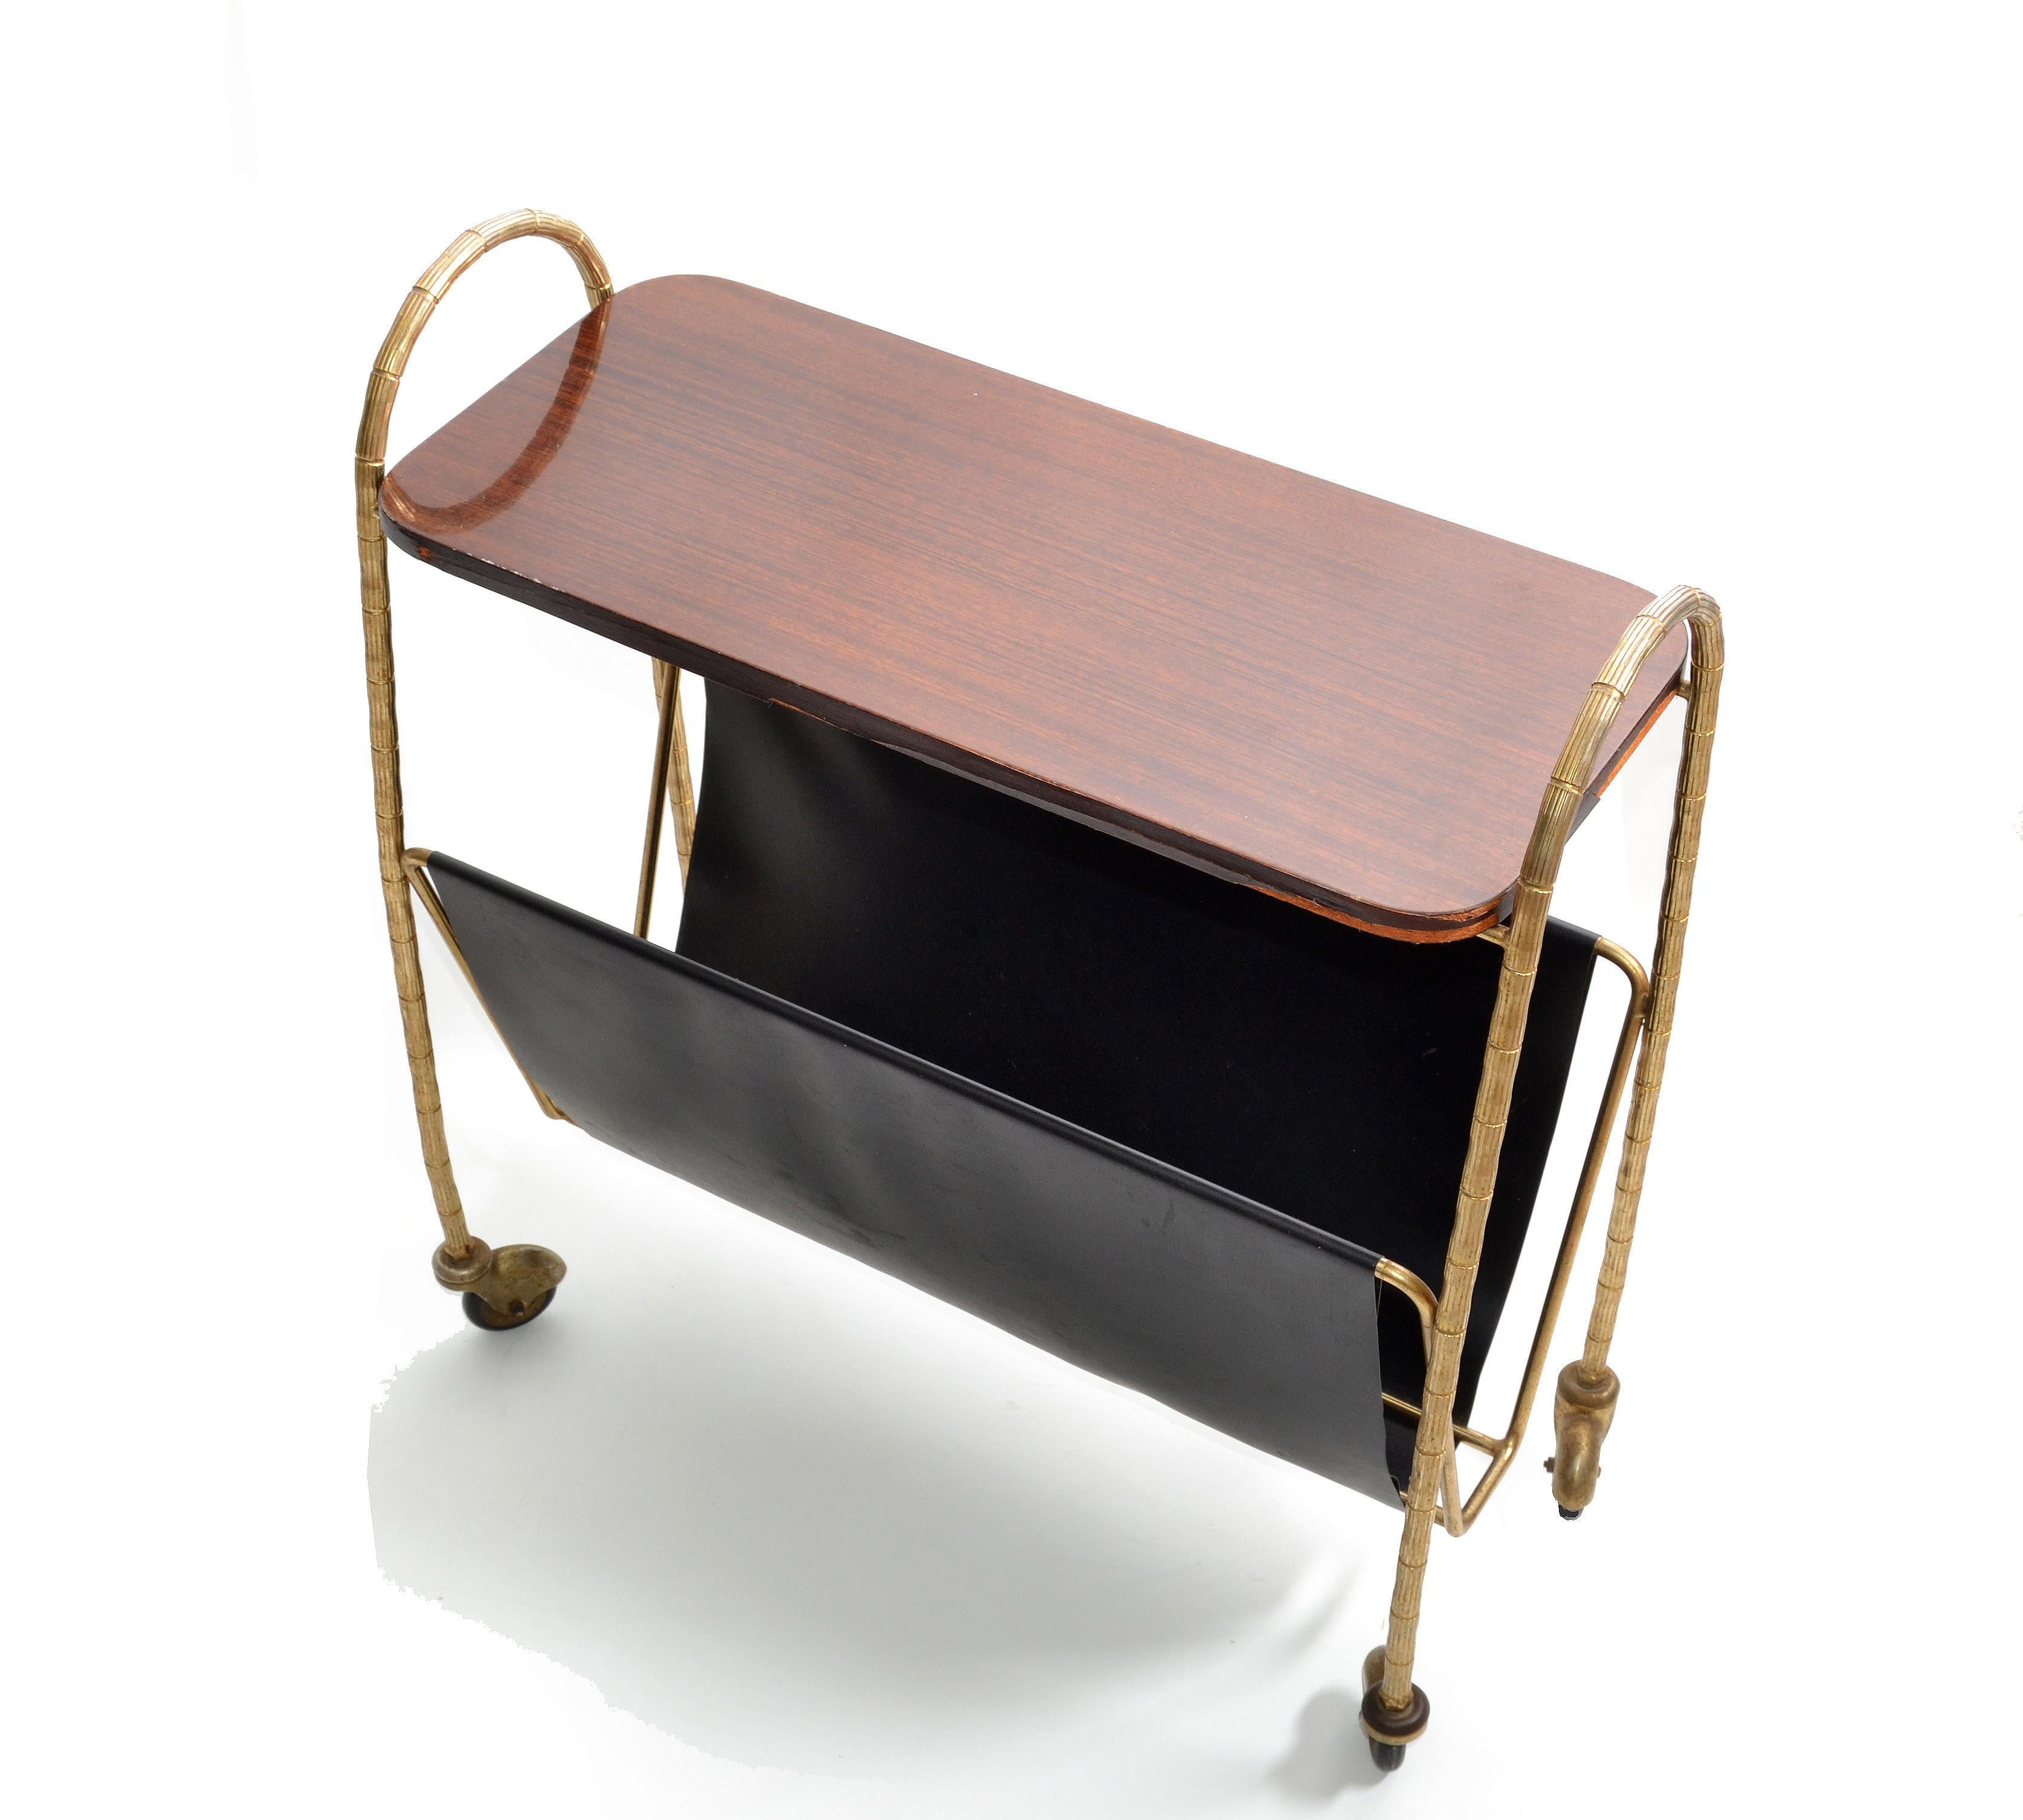 Mid-20th Century Maison Baguès French Bronze, Leather & Laminated Wood Magazine Rack on Casters For Sale